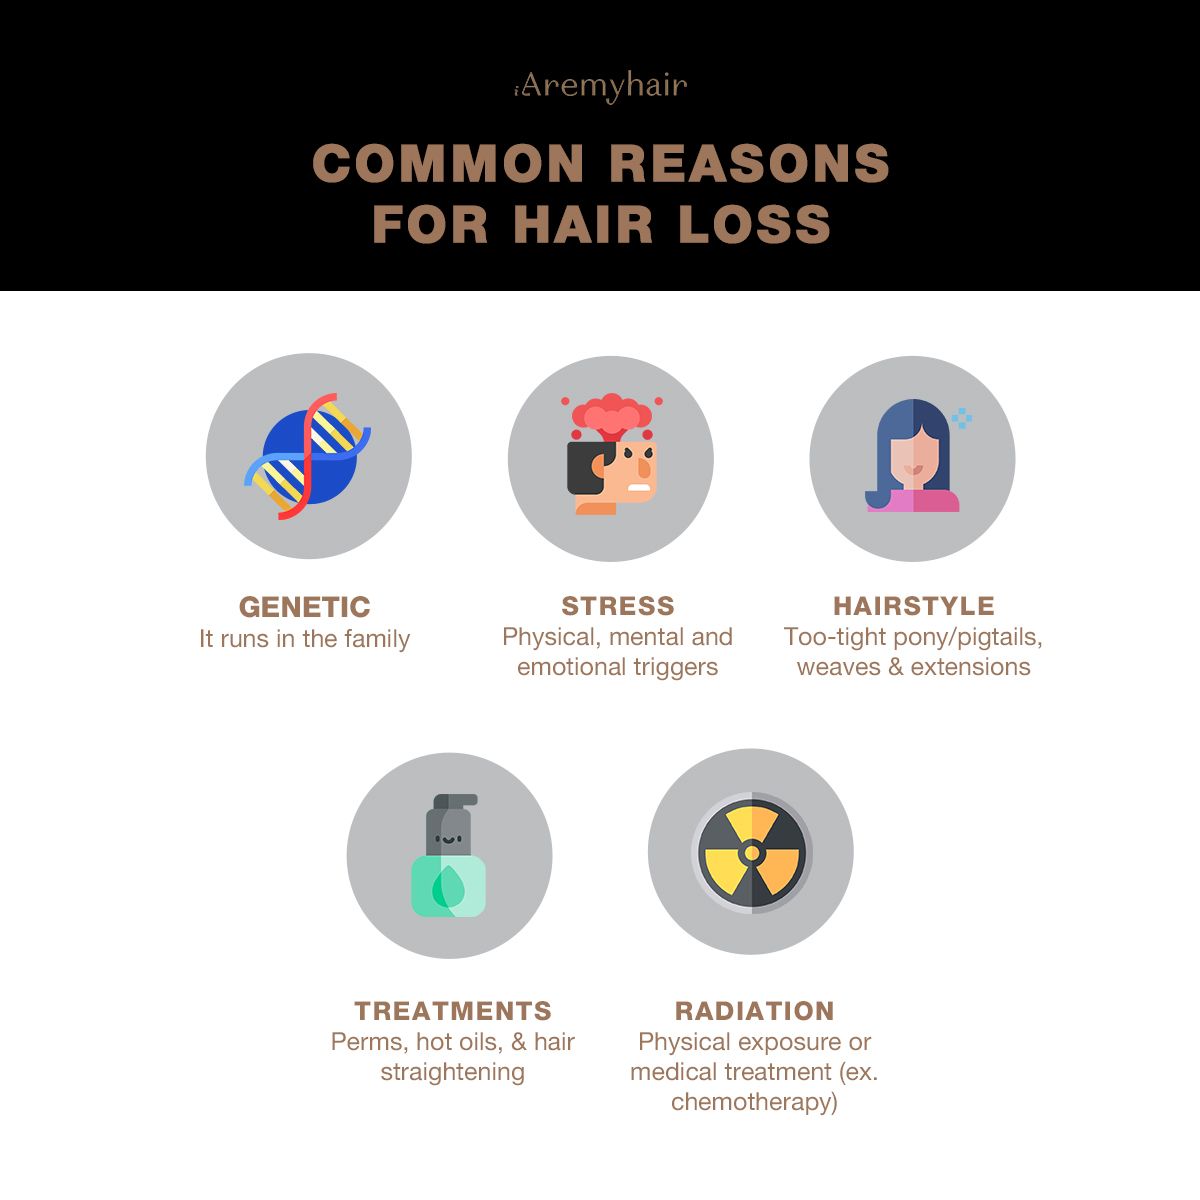 Common Reasons for Hair Loss - Aremyhair